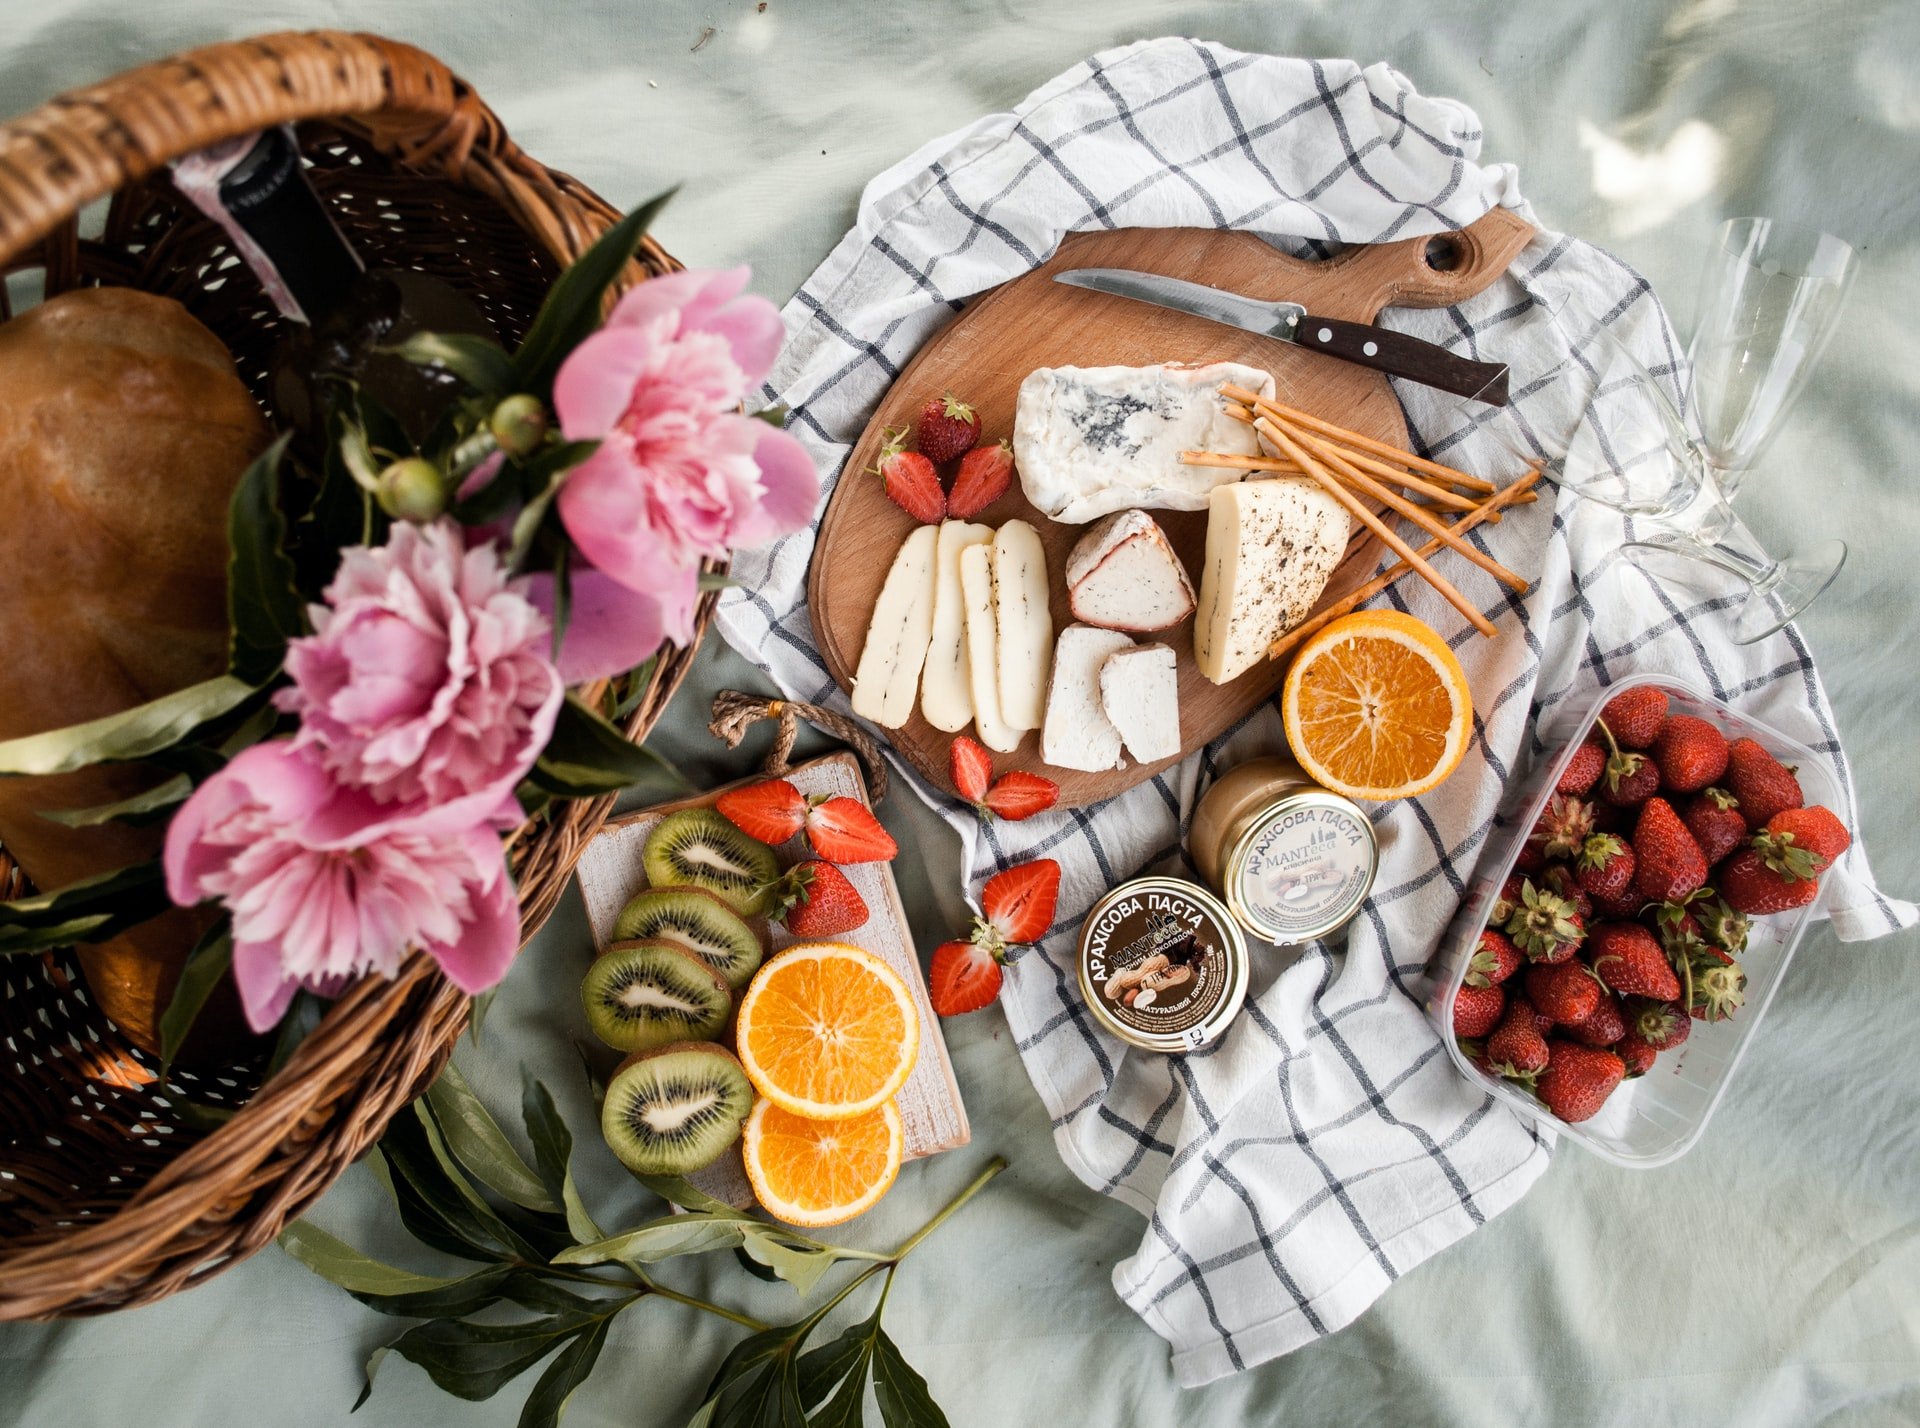 6 Things to Bring for an Aesthetic Picnic